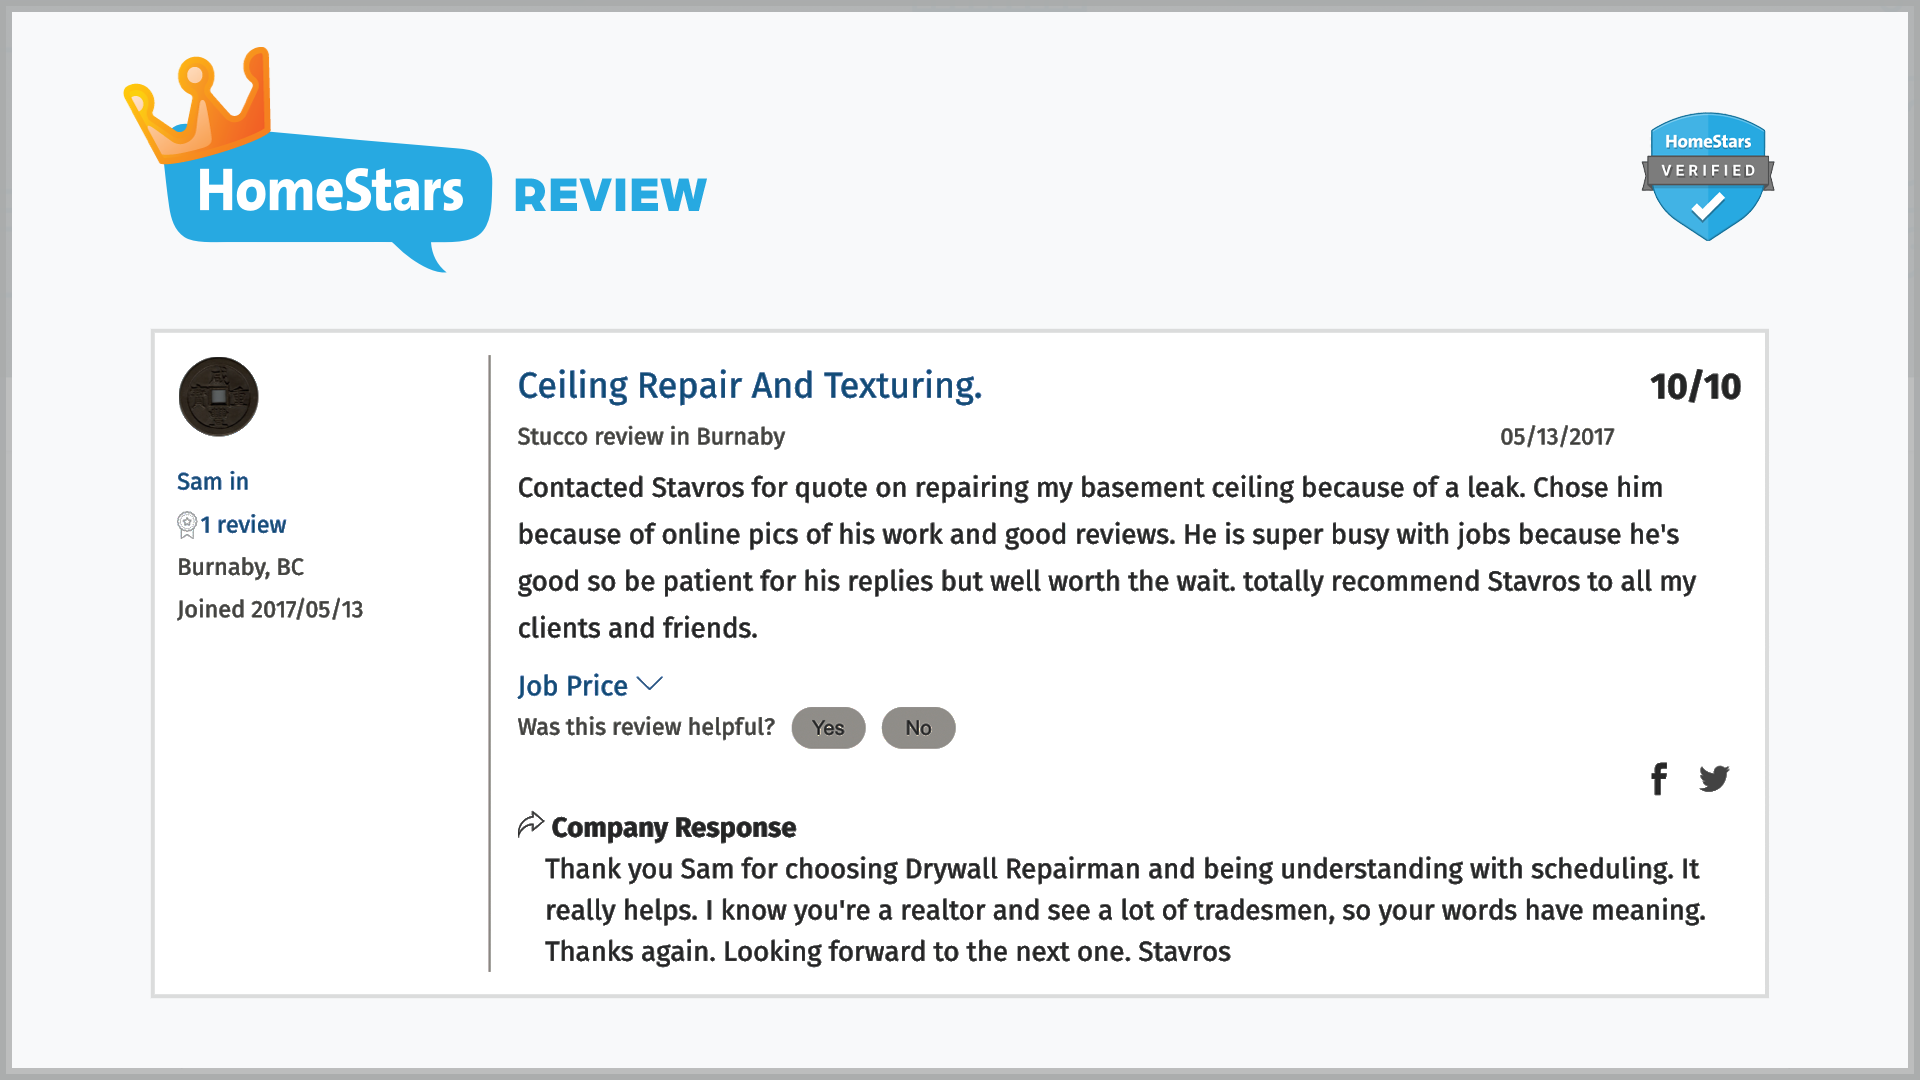 homestars-review-10-out-of-10-drywall-repairman-vancouver-bc-canada-9